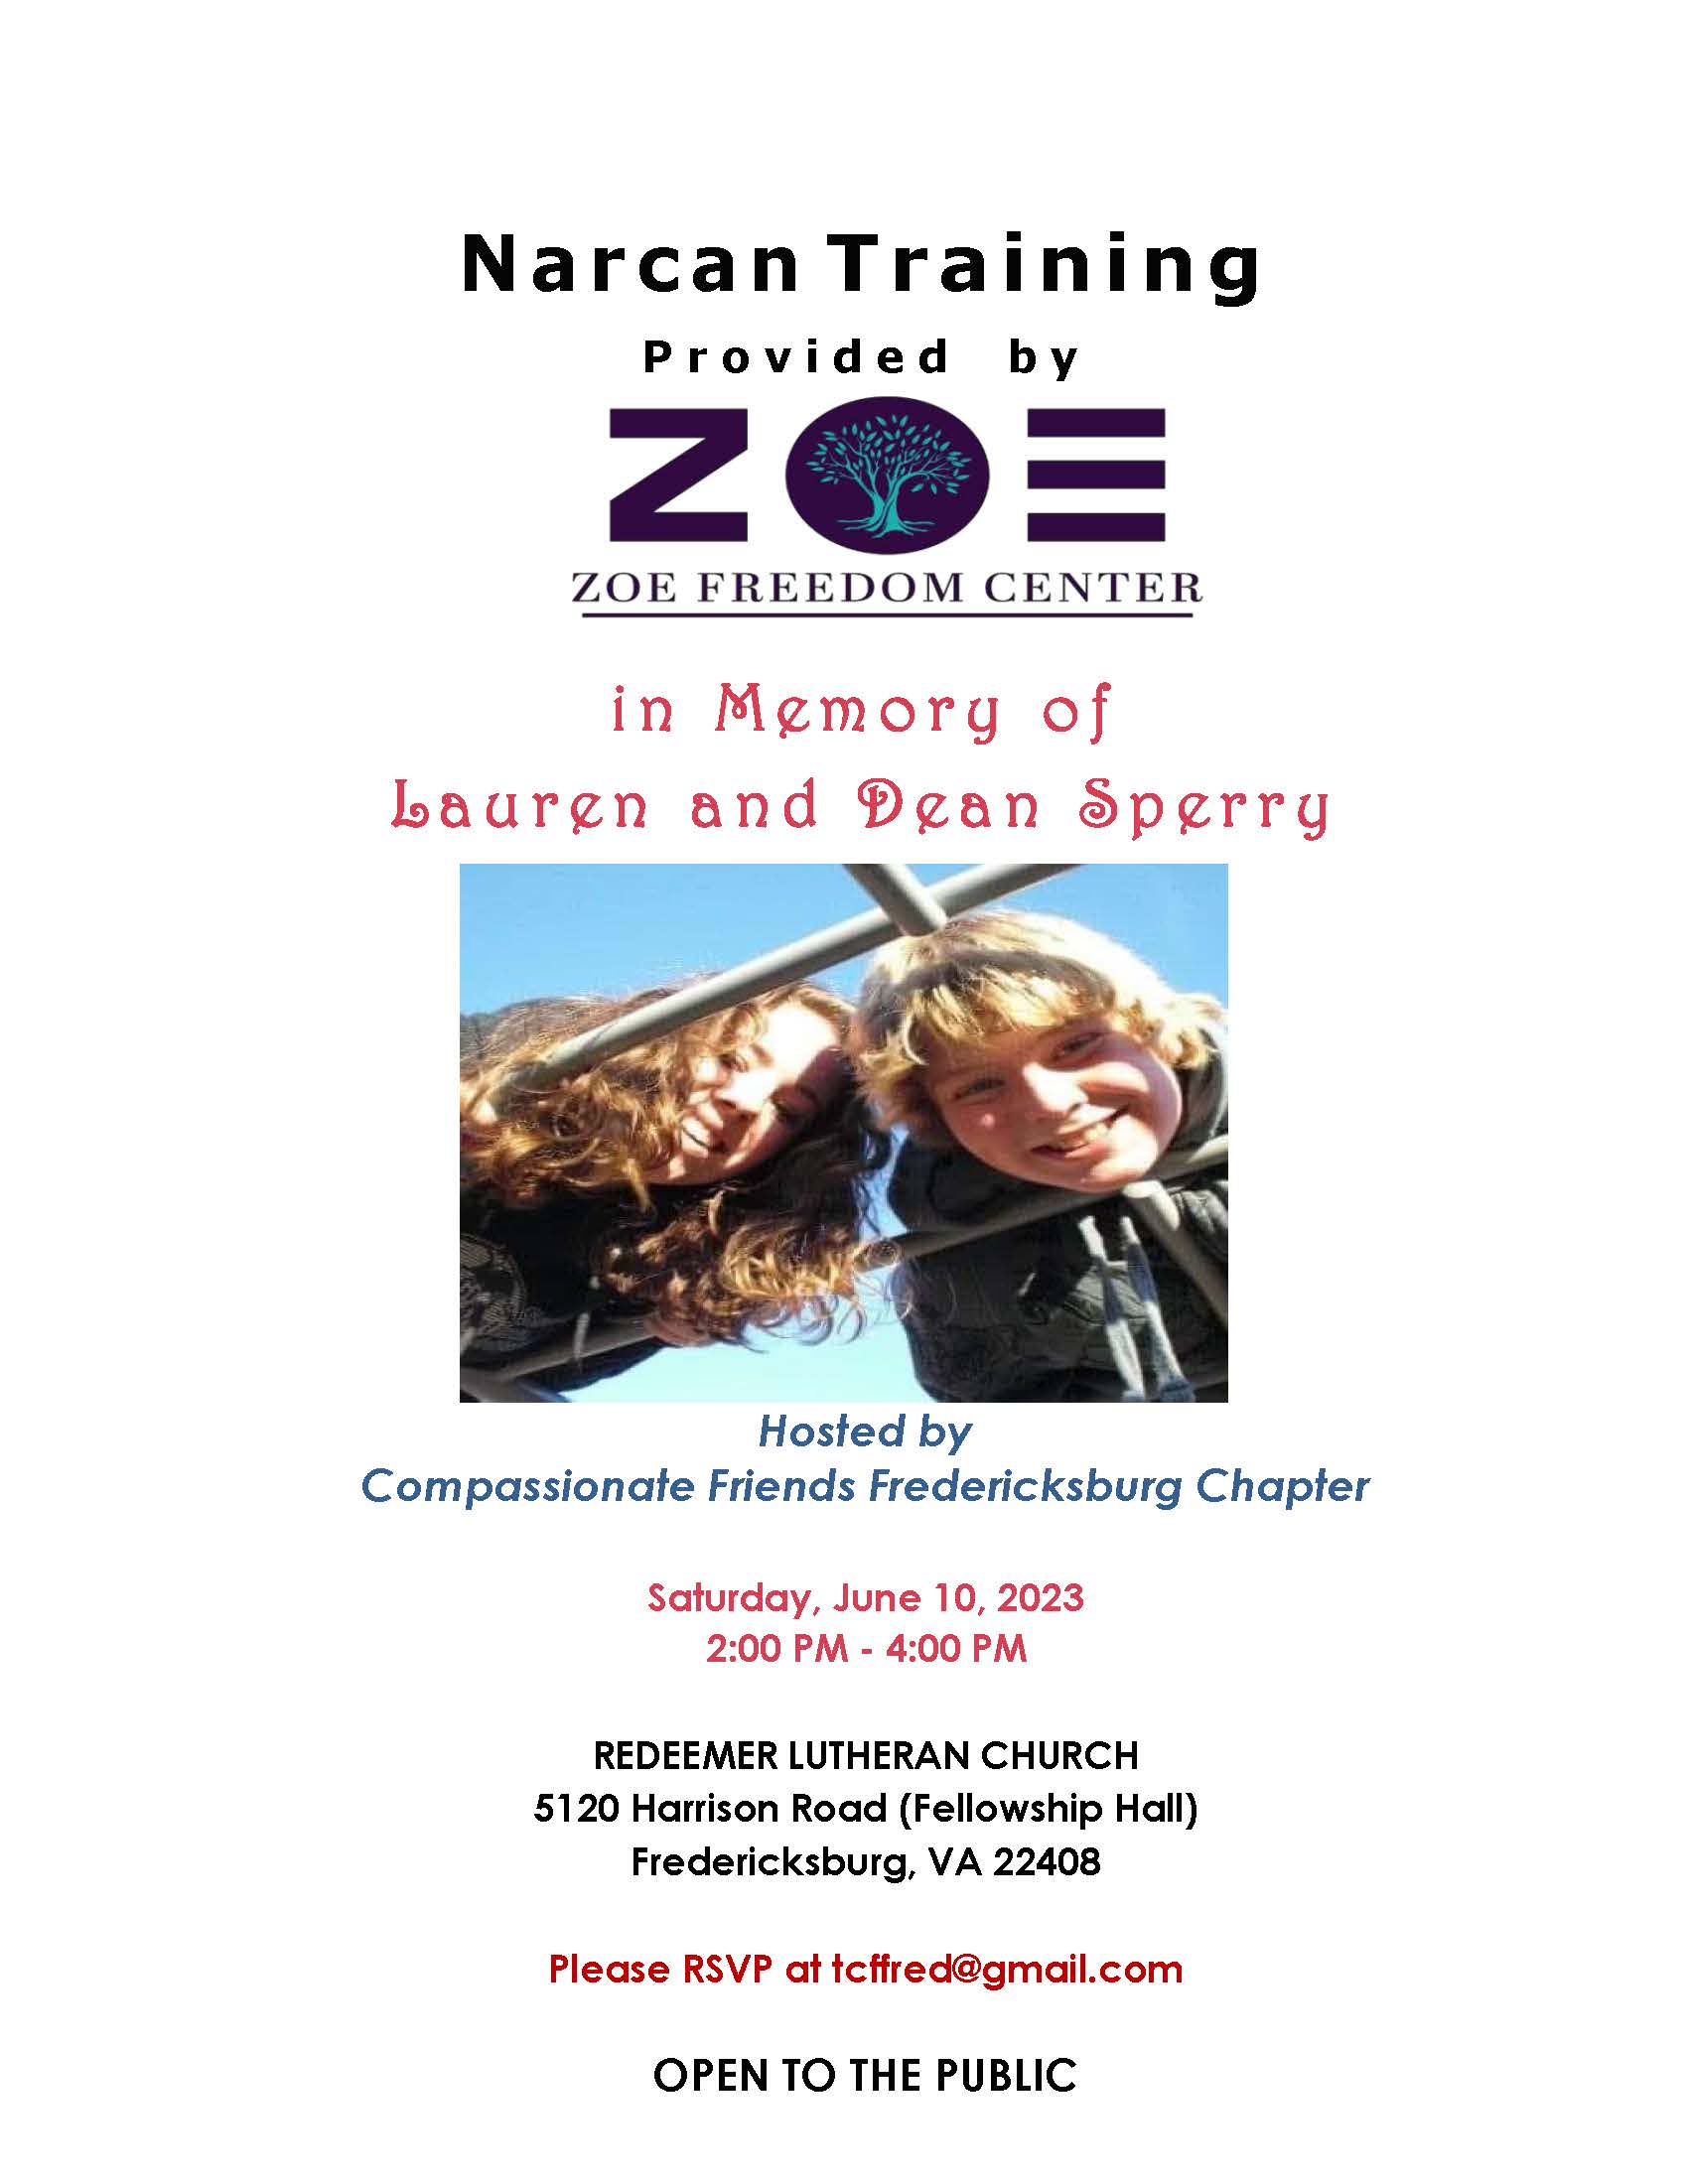 <h1 class="tribe-events-single-event-title">Narcan Training provided by Zoe Freedom Center in Loving Memory of Lauren and Dean Sperry.</h1>